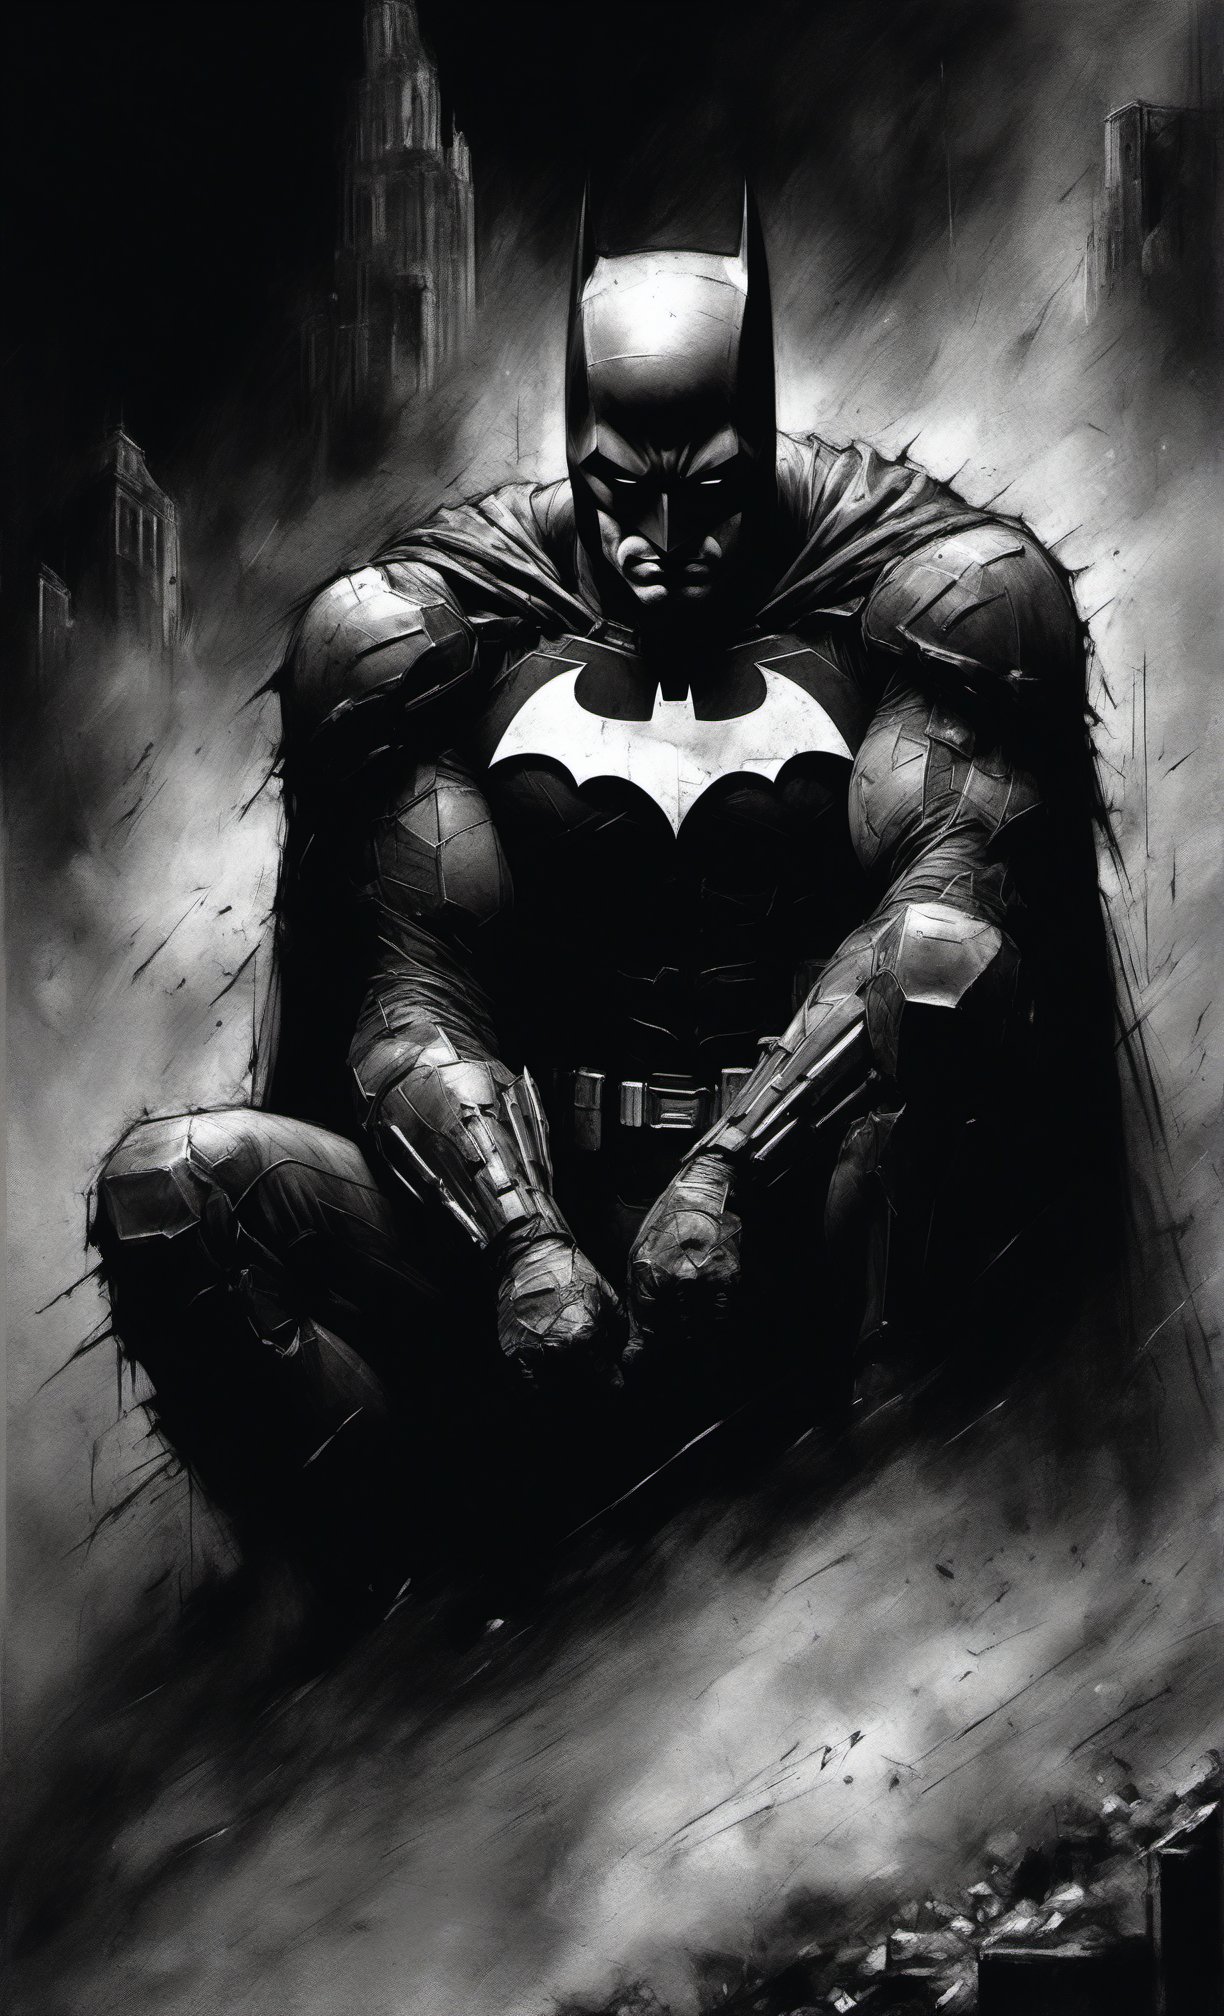 score_9, score_8_up, score_7_up, score_6_up, CharcoalDarkStyle, Batman with combat weathered armors suit,, source_anime, Gotham City, facing fears, splashes of dark black to faint light grey, Tim Sale, Urban Comics, lost, solo,  Poorly_lit, Dark, Shadows, sadness, confusion, depravade, crawling, begging the skies for help, dark, sketch, drawn with charcoal, monochrome, black and white, (Masterpiece:1.3) (best quality:1.2) (high quality:1.1) 